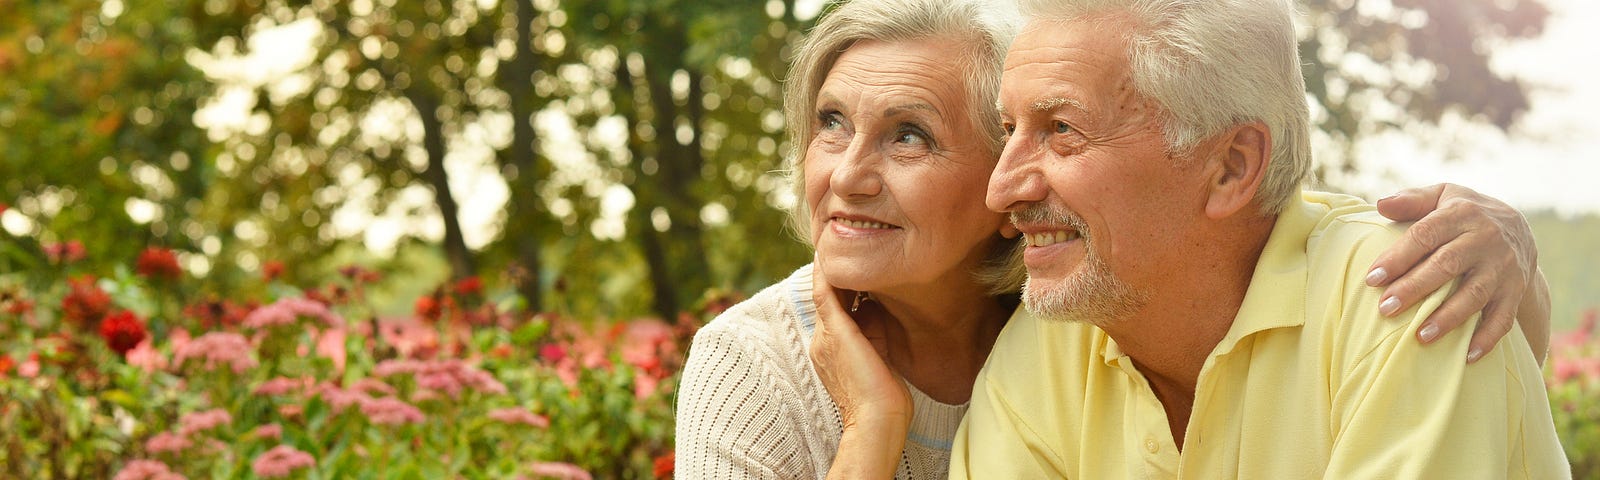 Older man and woman smiling surrounded by flowers (living apart together relationships, LAT relationships, older couples, aging, senior citizens)